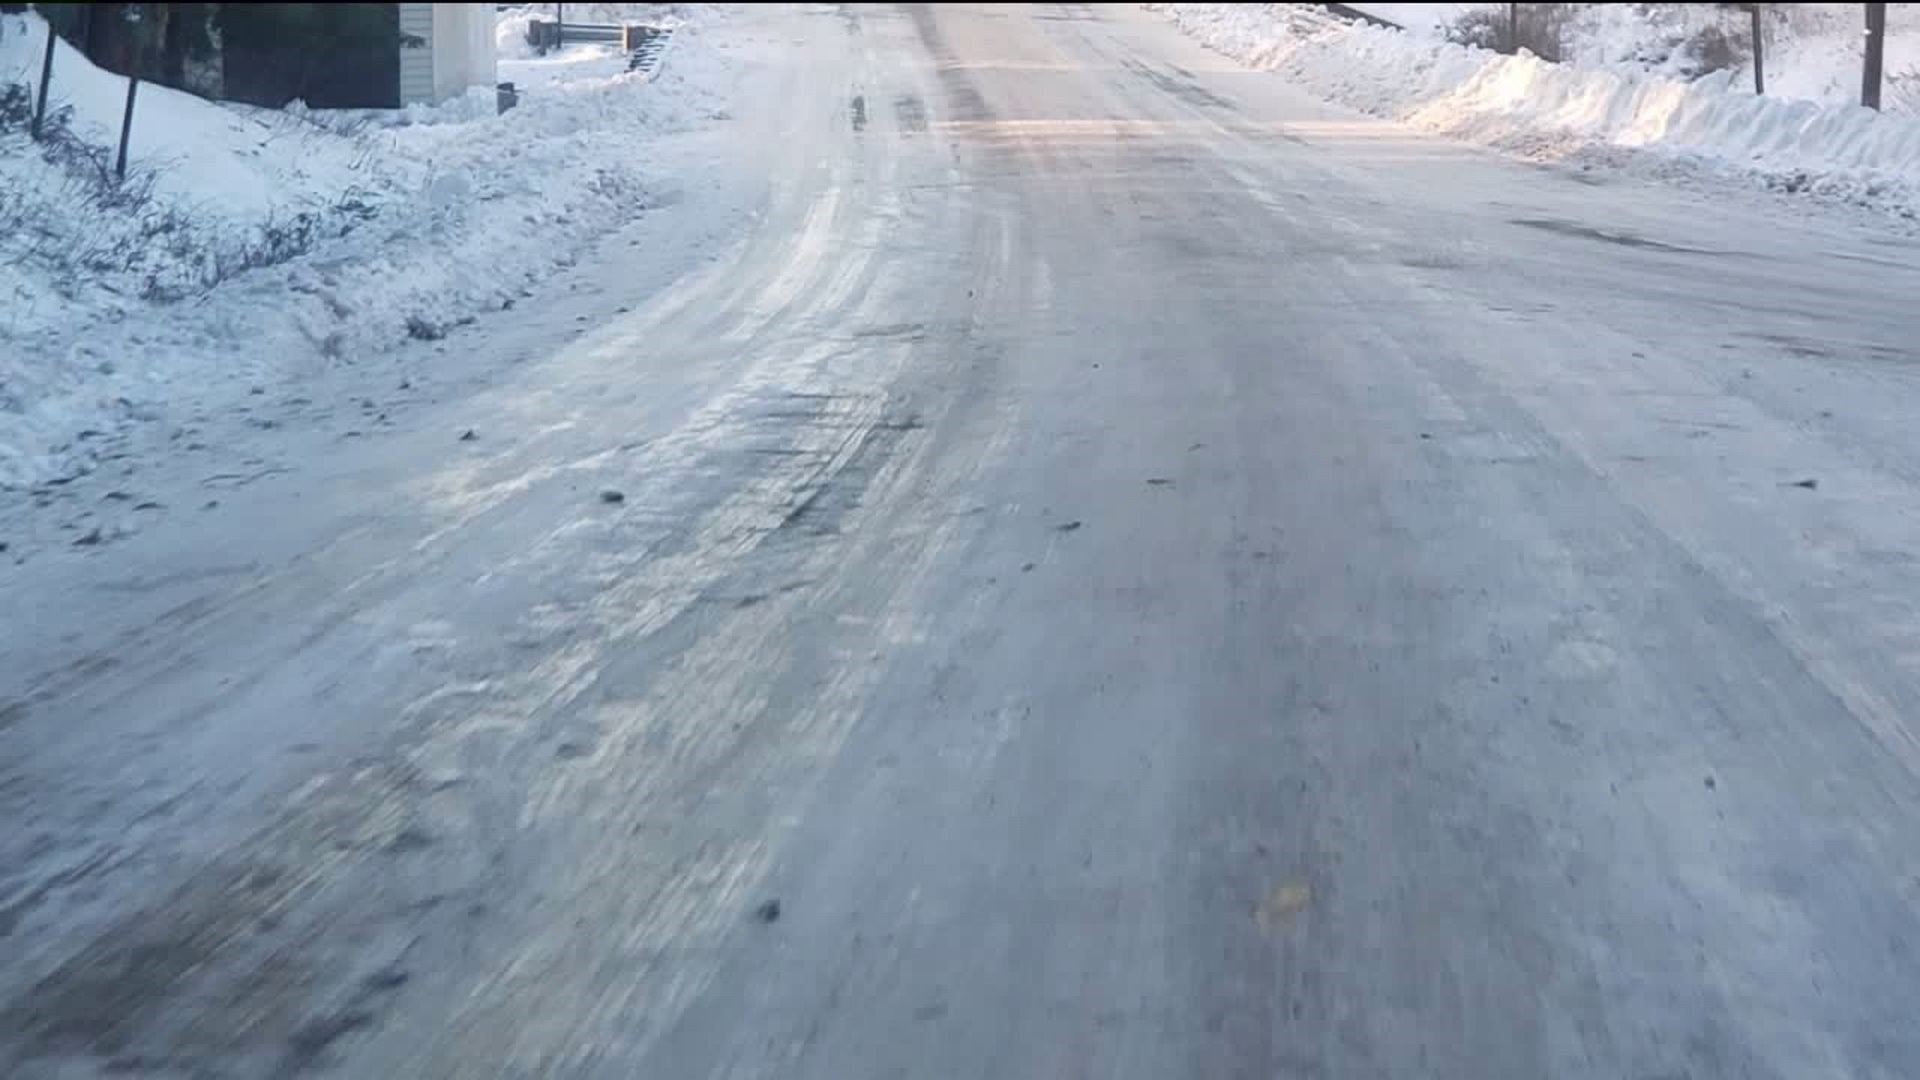 Icy Roads Turn into Sloppy and Slippery Driving Conditions in Wayne County